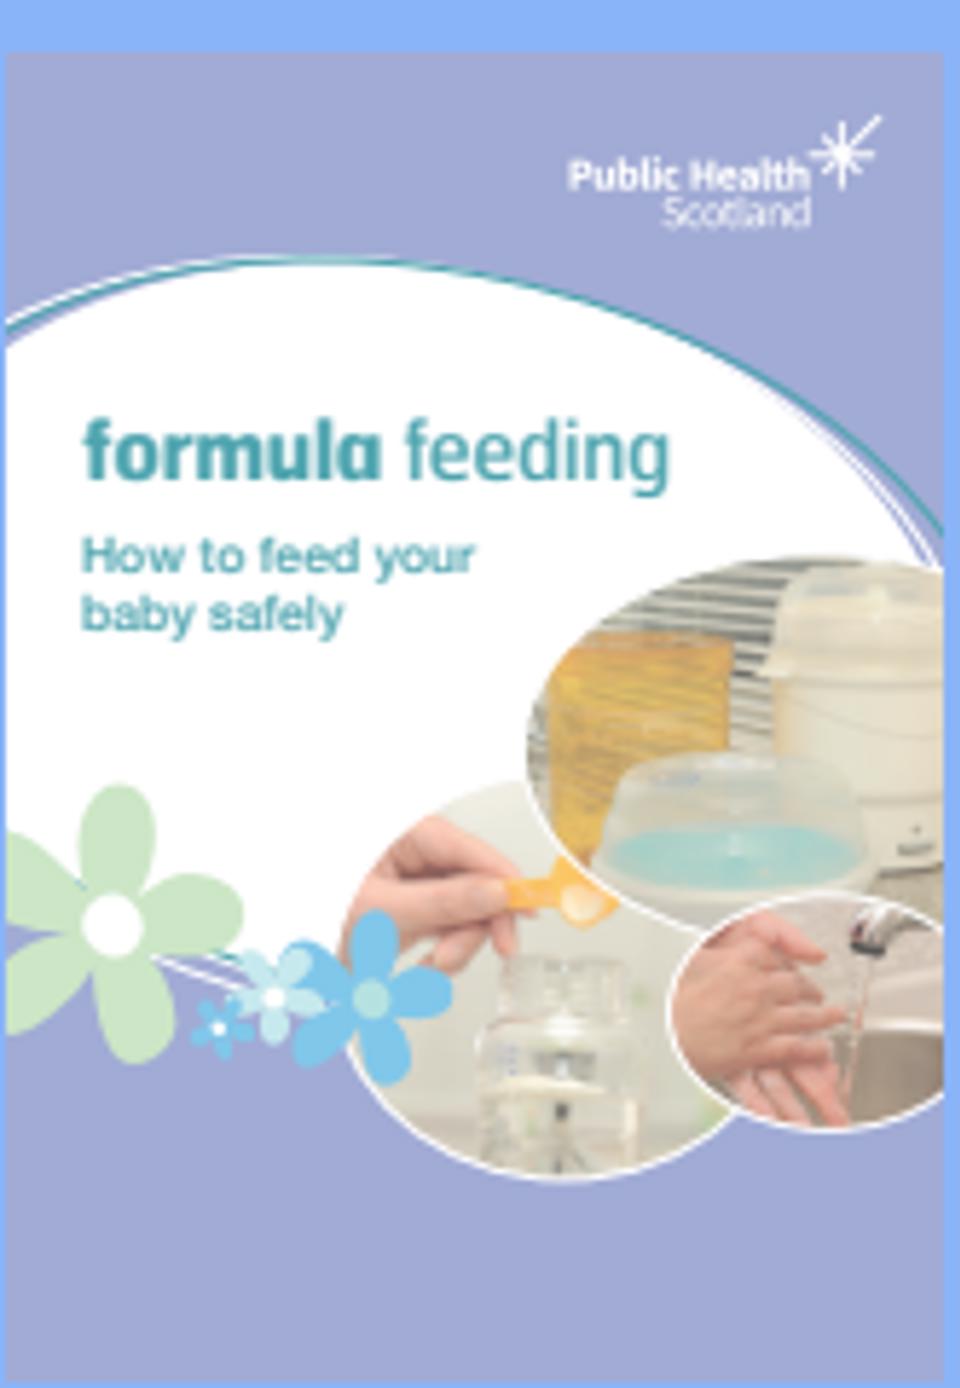 how to feed your baby safely